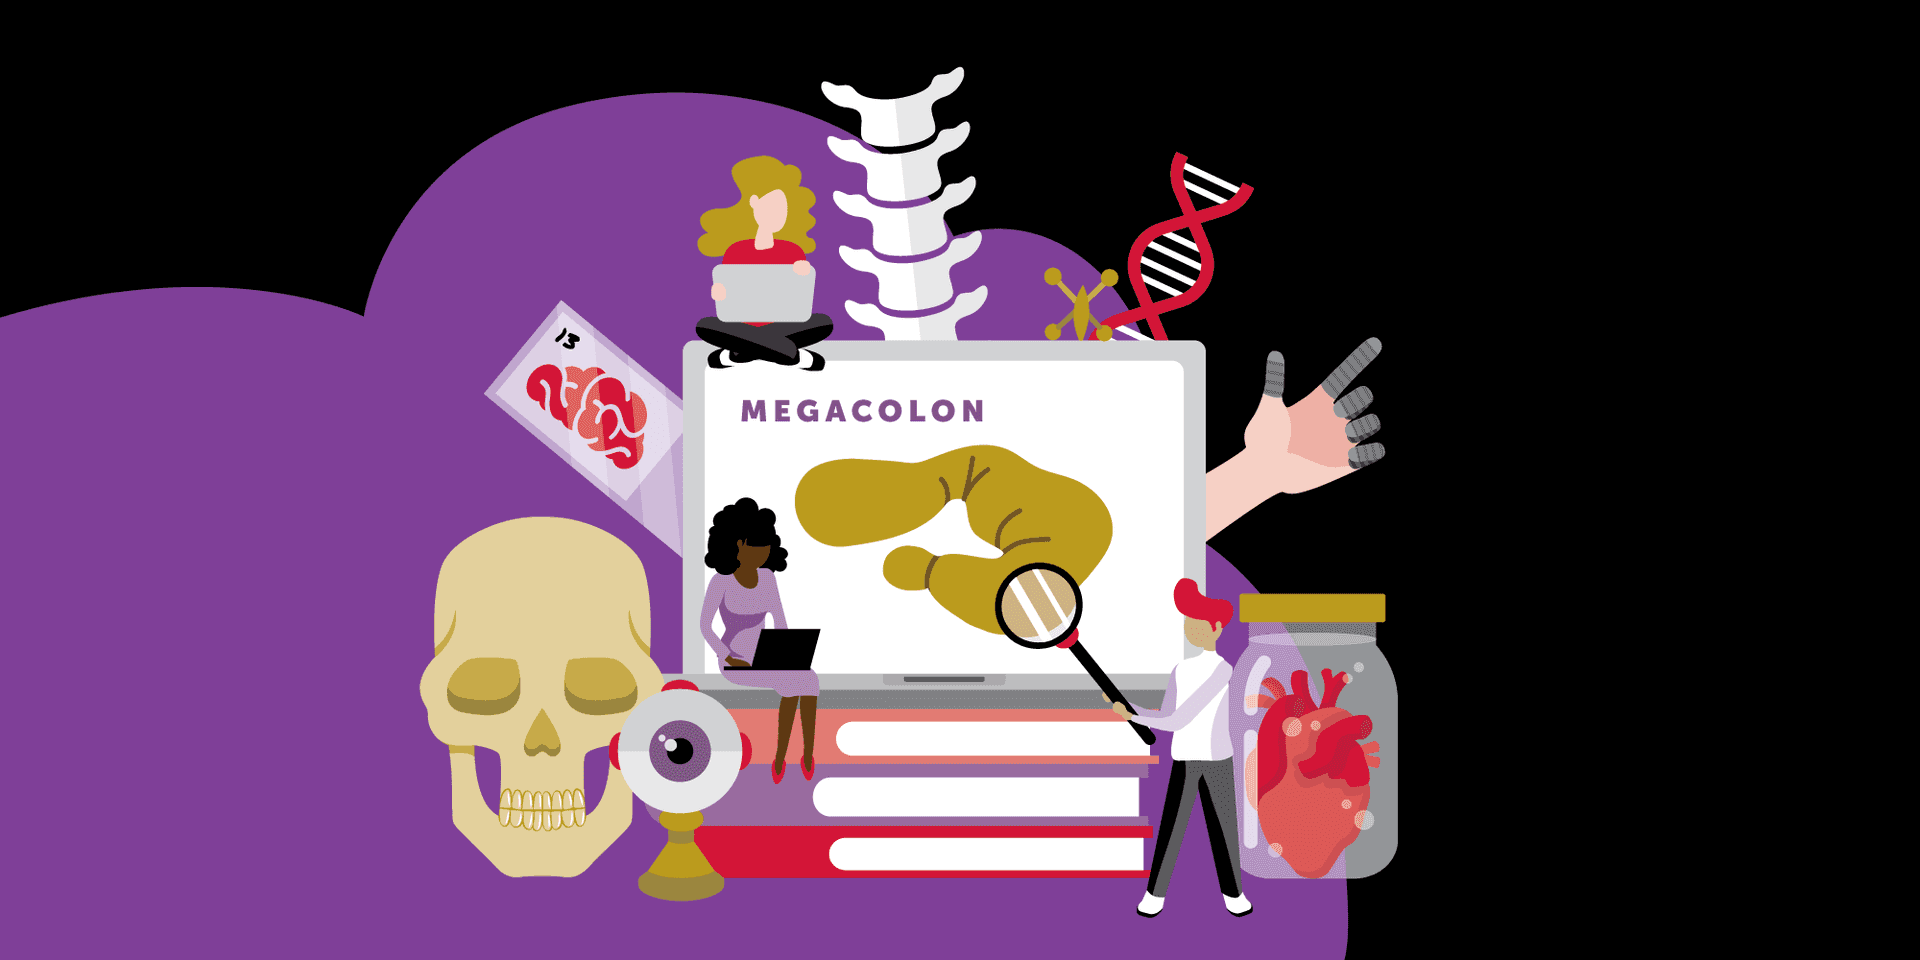 Modern illustration of various medical items and students surrounding an open laptop with an illustration that reads "megacolon"